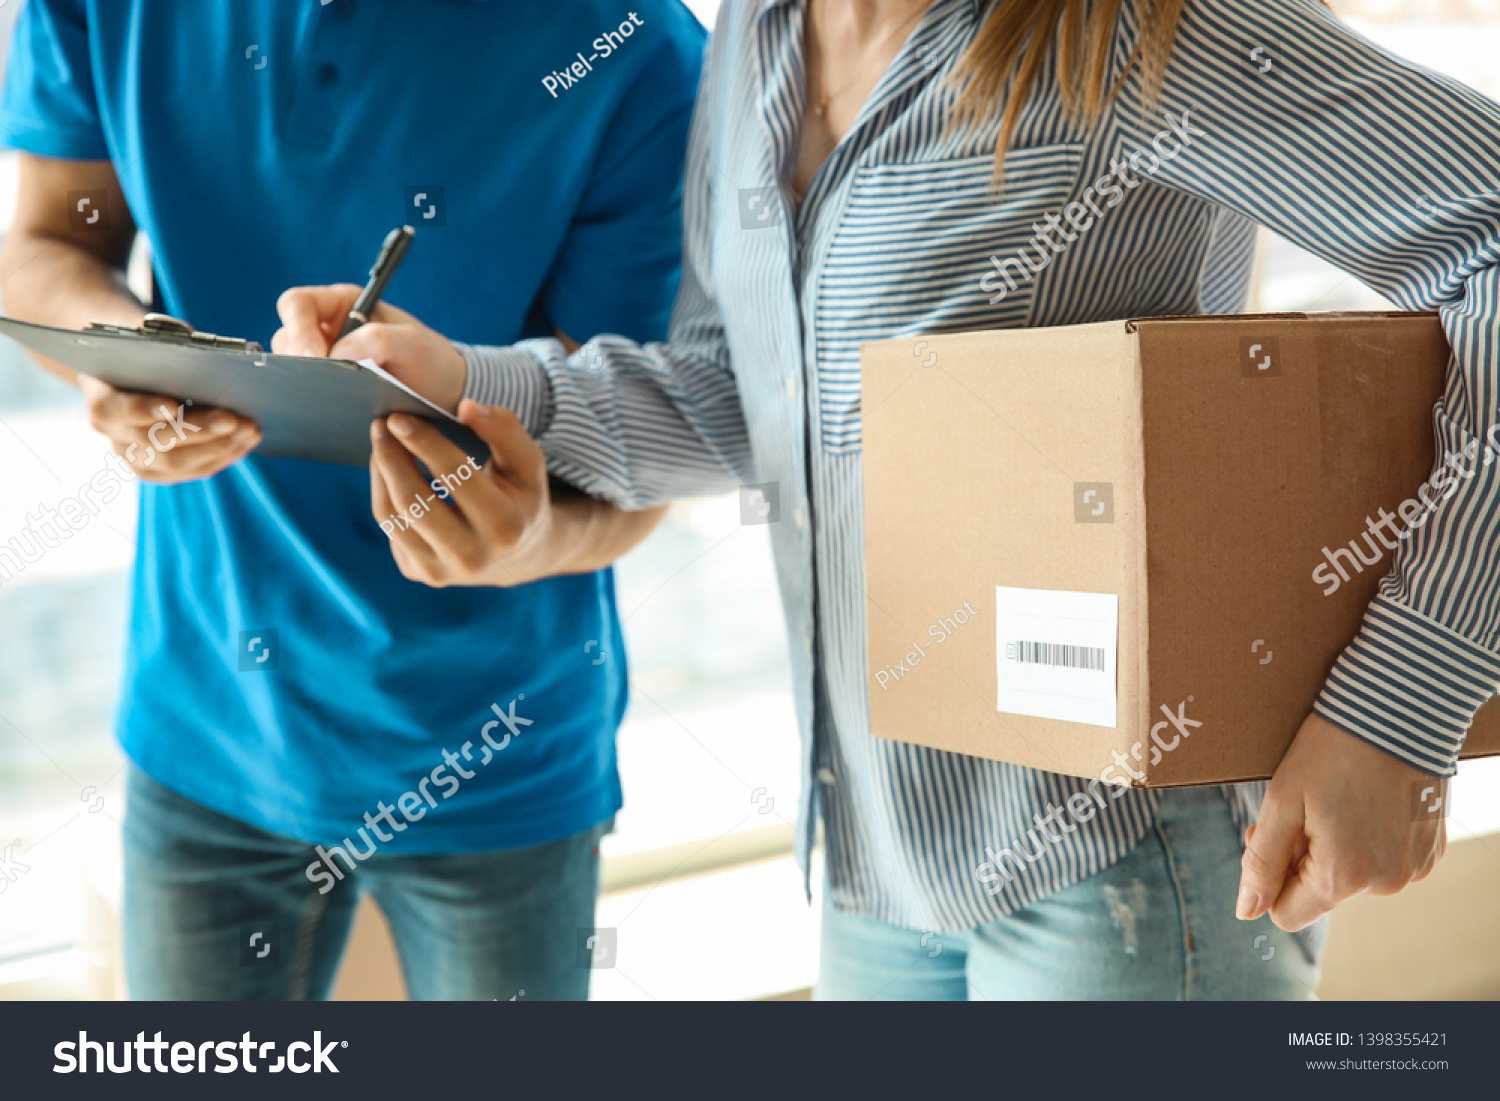 Woman signing documents to confirm receiving of order from delivery company #1398355421